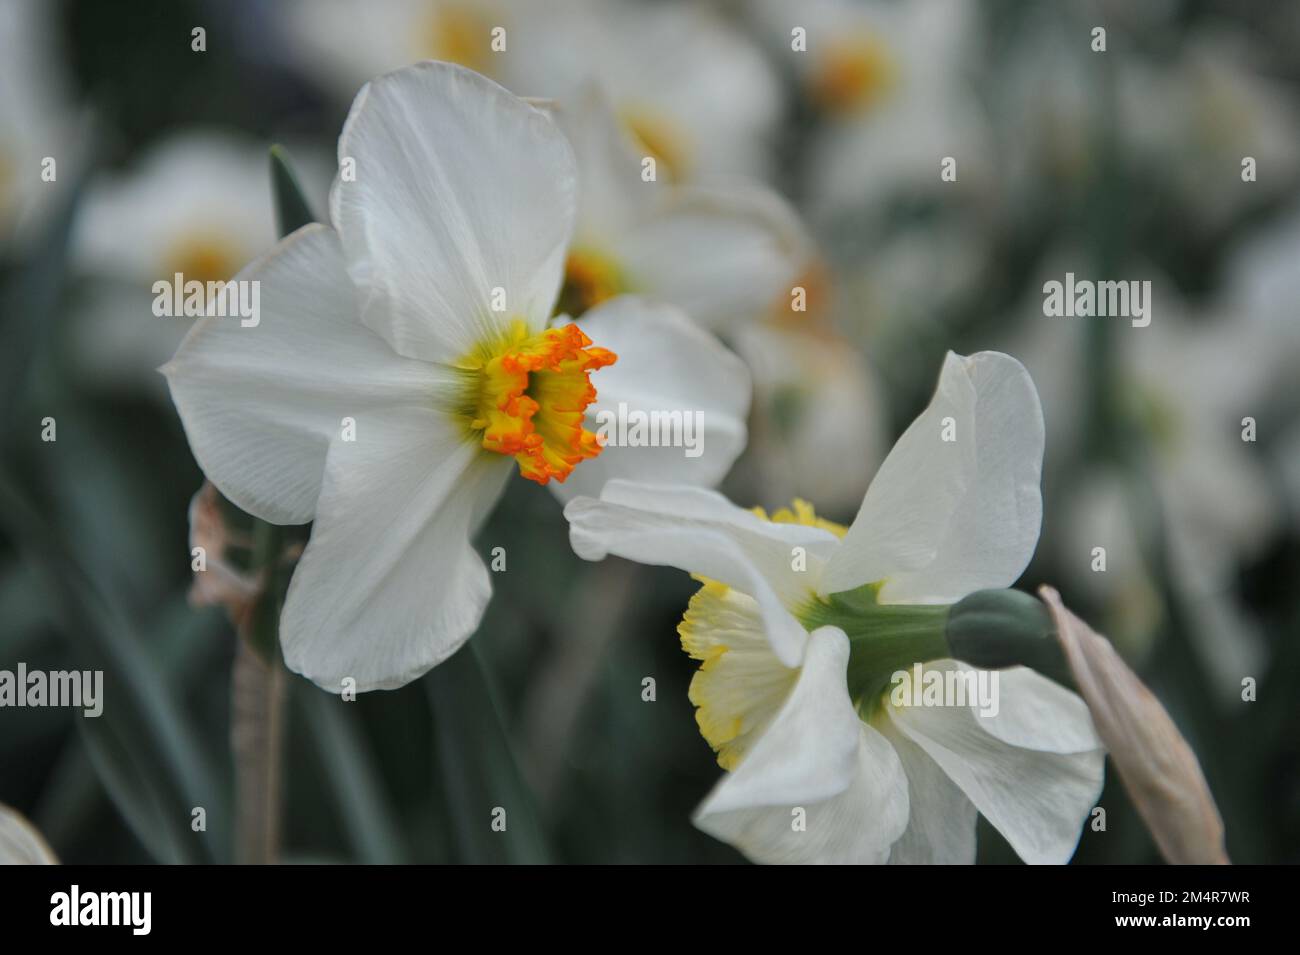 White and yellow Small-Cupped daffodils (Narcissus) Lancaster bloom in a garden in April Stock Photo